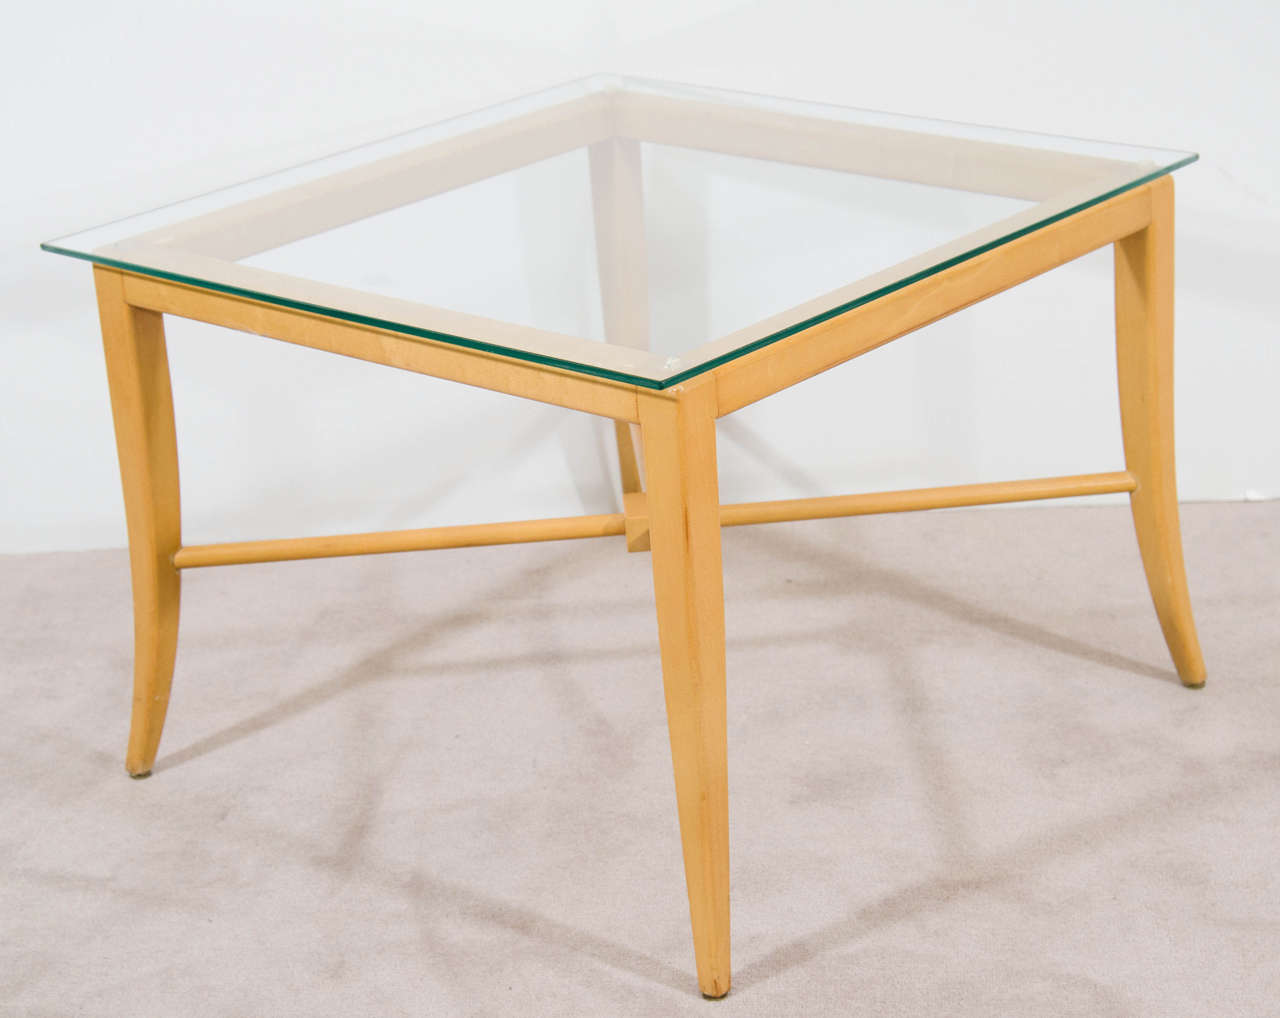 A vintage pair of side and end tables by Tommi Parzinger, produced circa 1950s, with glass top (1/8